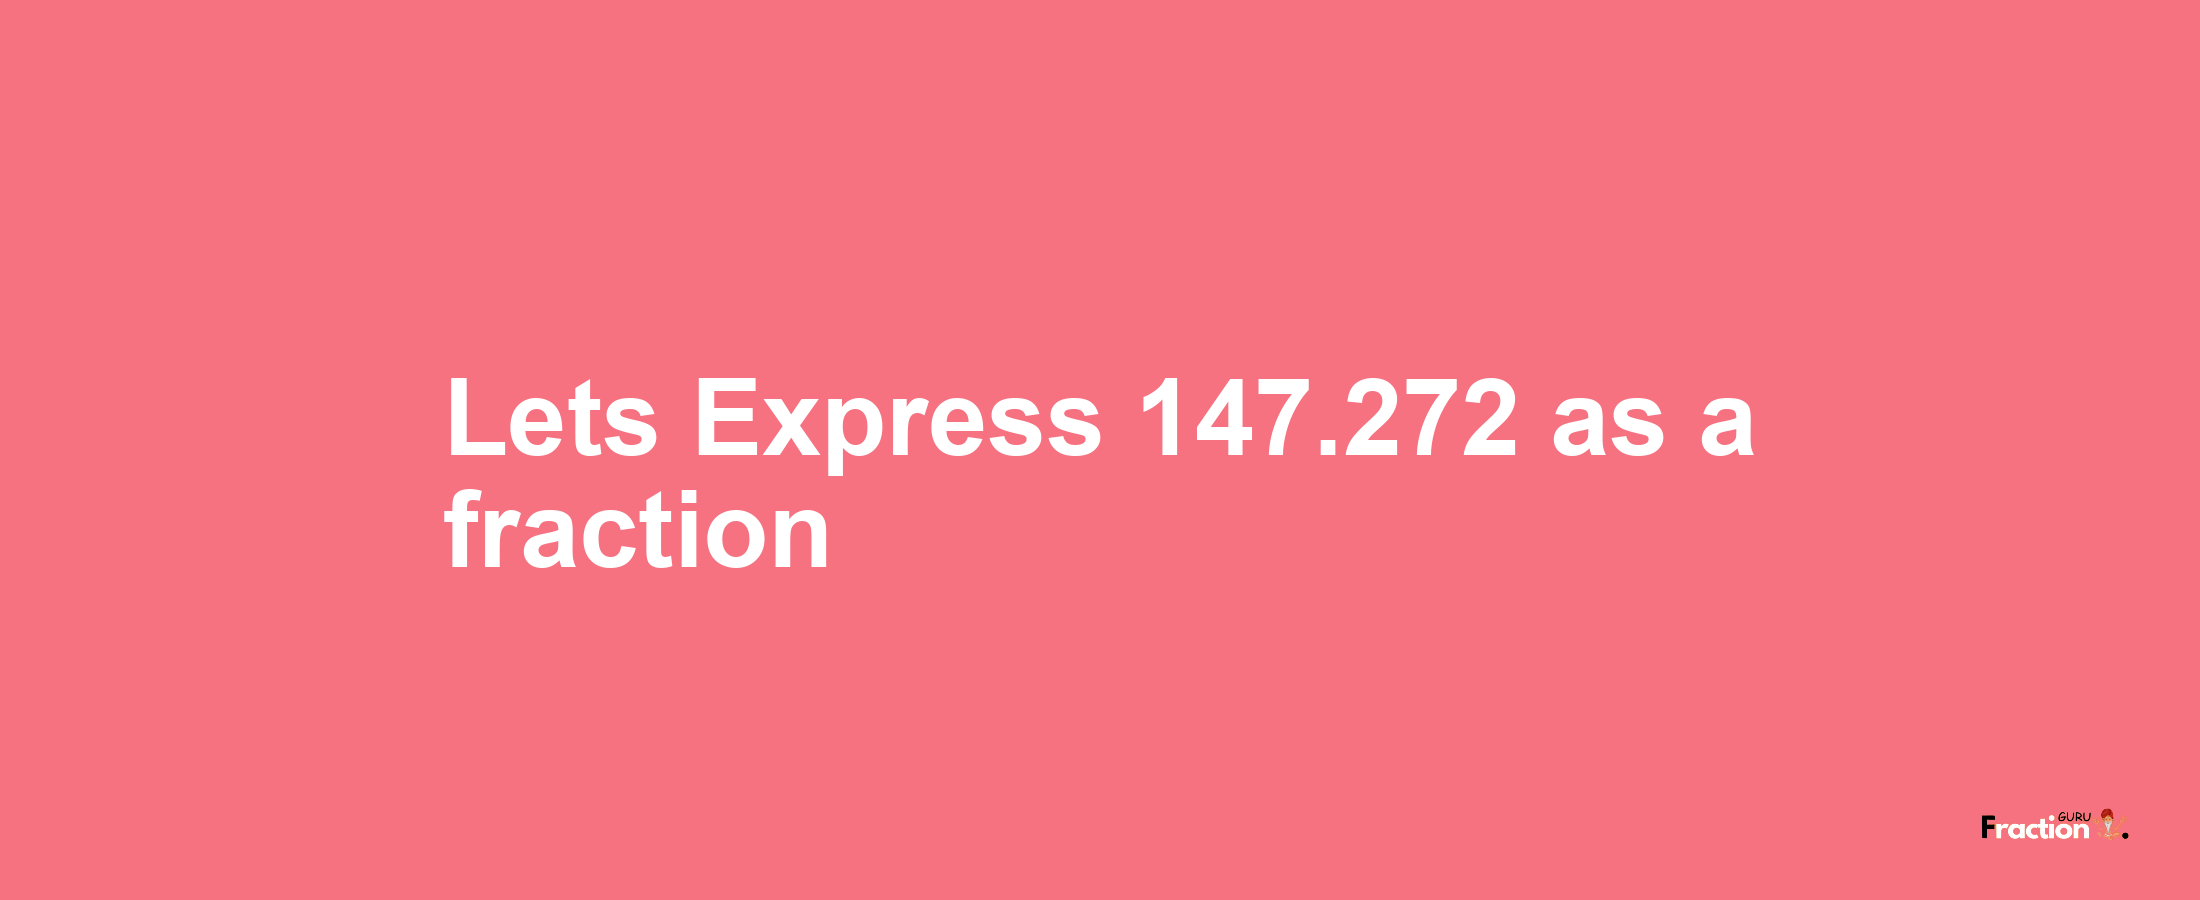 Lets Express 147.272 as afraction